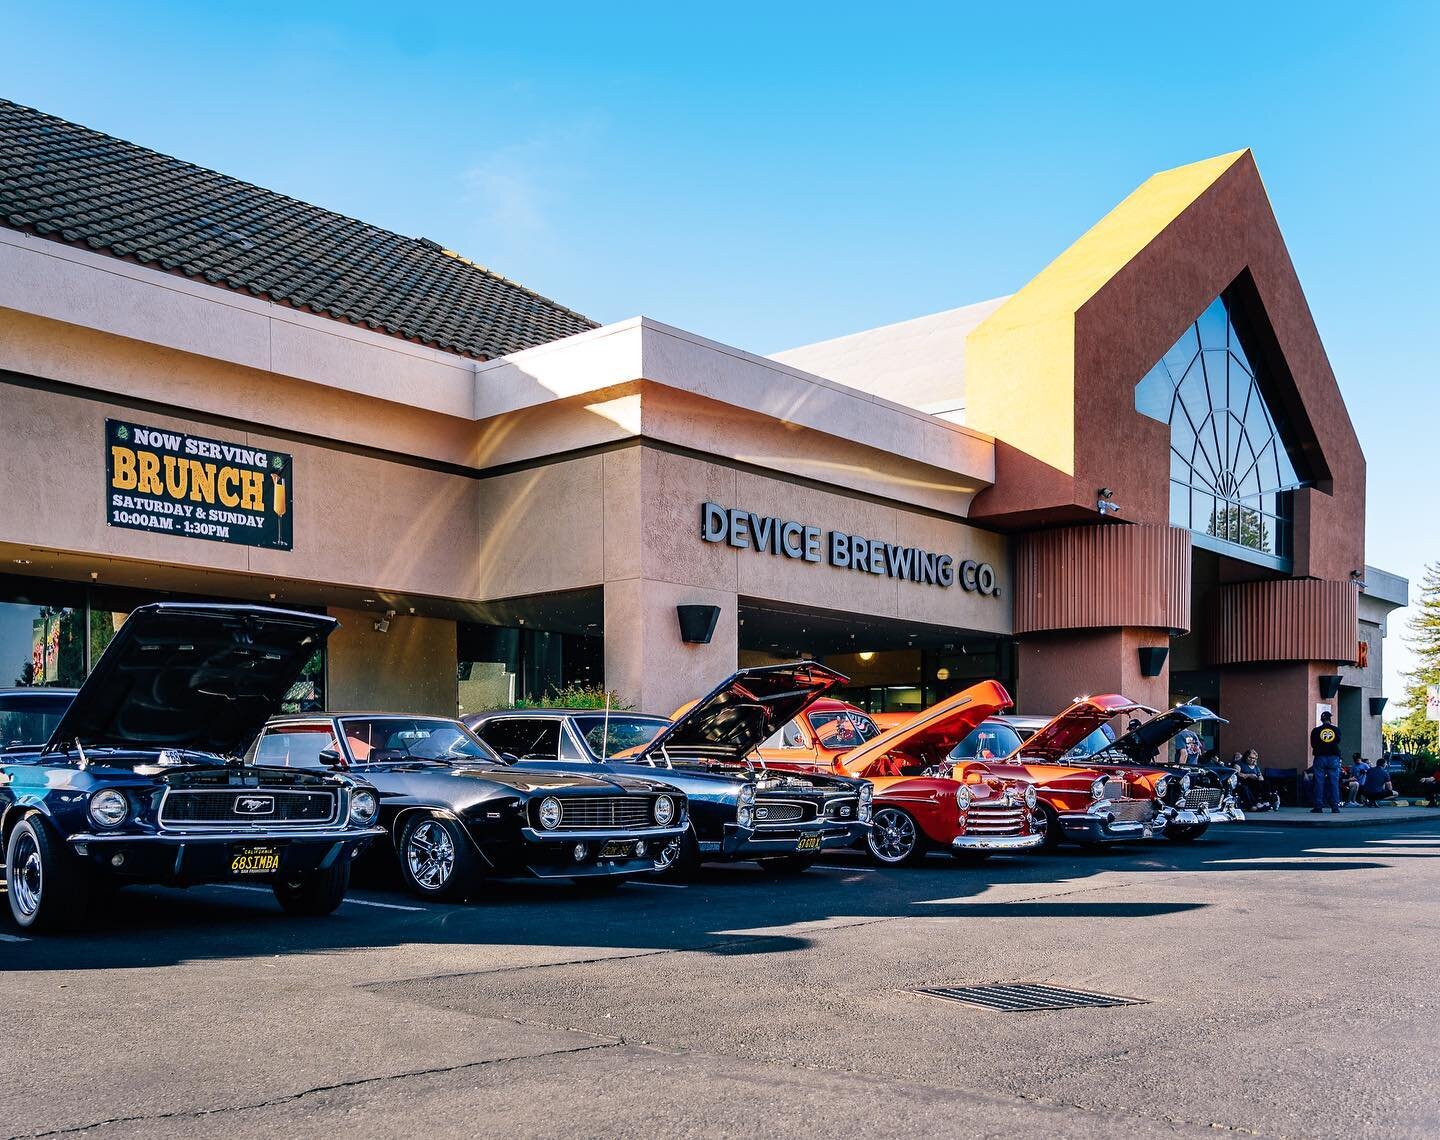 It's Device Pocket/Greenhaven Classic Car Show + Bingo Night! 🚗🎉 We'll have an array of gorgeous classic cars out tonight from 4-8pm, with our free-to-play bingo night kicking off at 6pm.
&nbsp;
It's fun for all ages, so bring the family out for fo